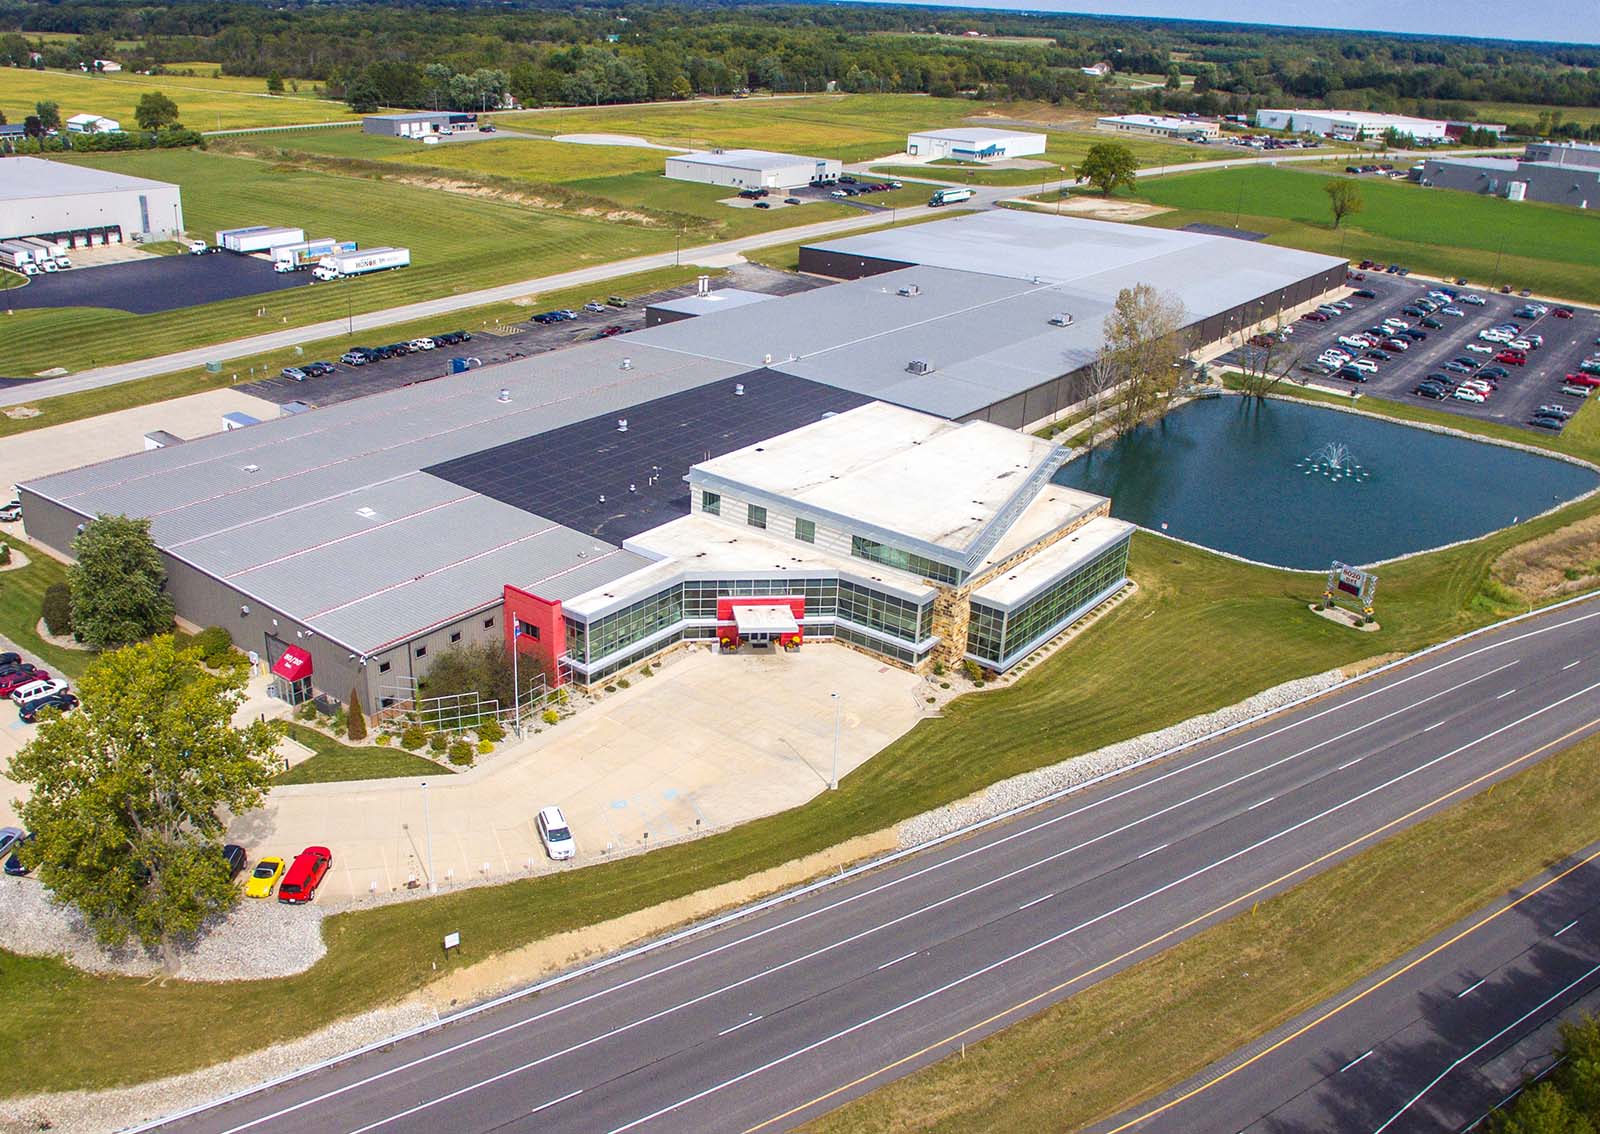 Aerial view of the 8020 building, featuring a modern commercial design with a red entrance and adjacent pond.